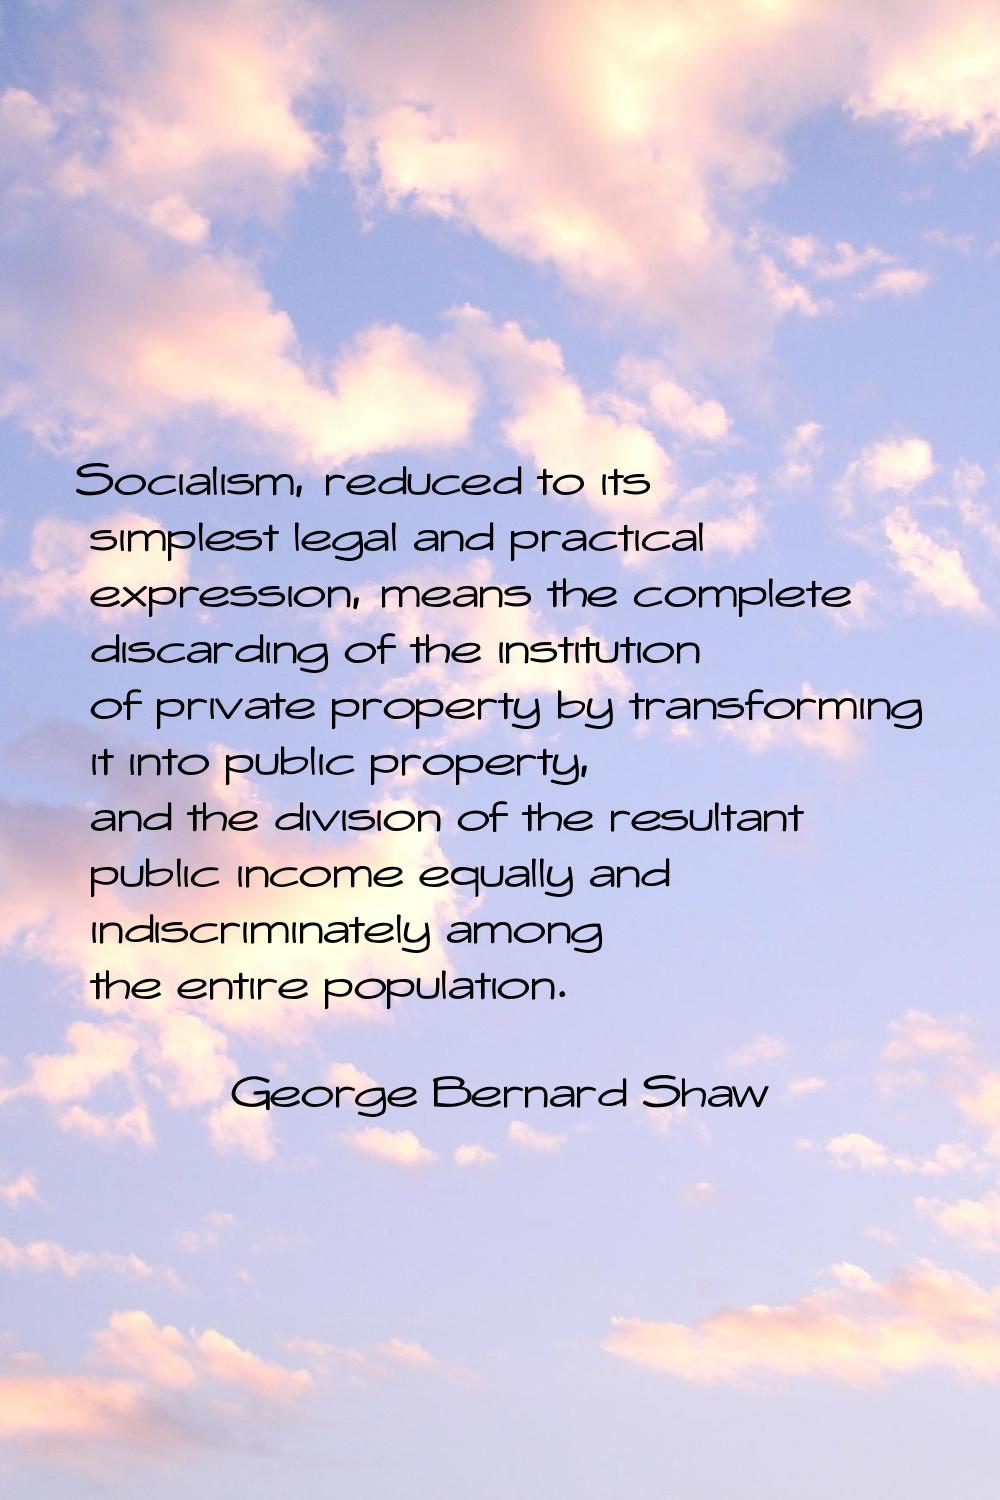 Socialism, reduced to its simplest legal and practical expression, means the complete discarding of